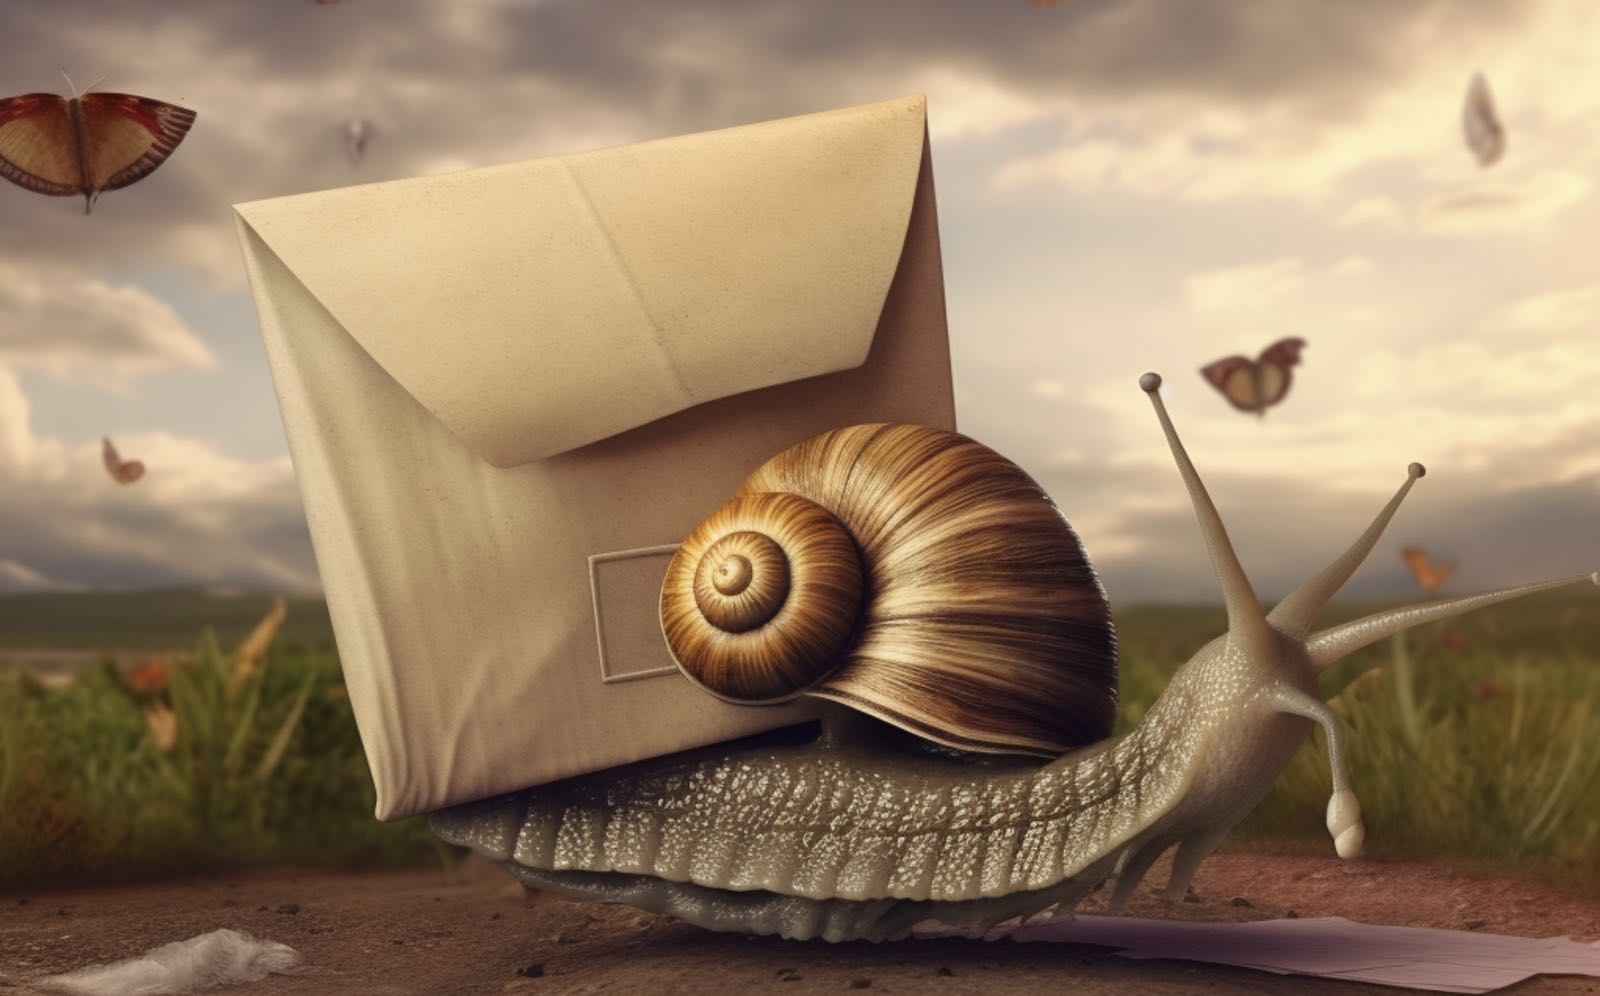 Snail mail, an AI generated image of a snail carrying an envelope